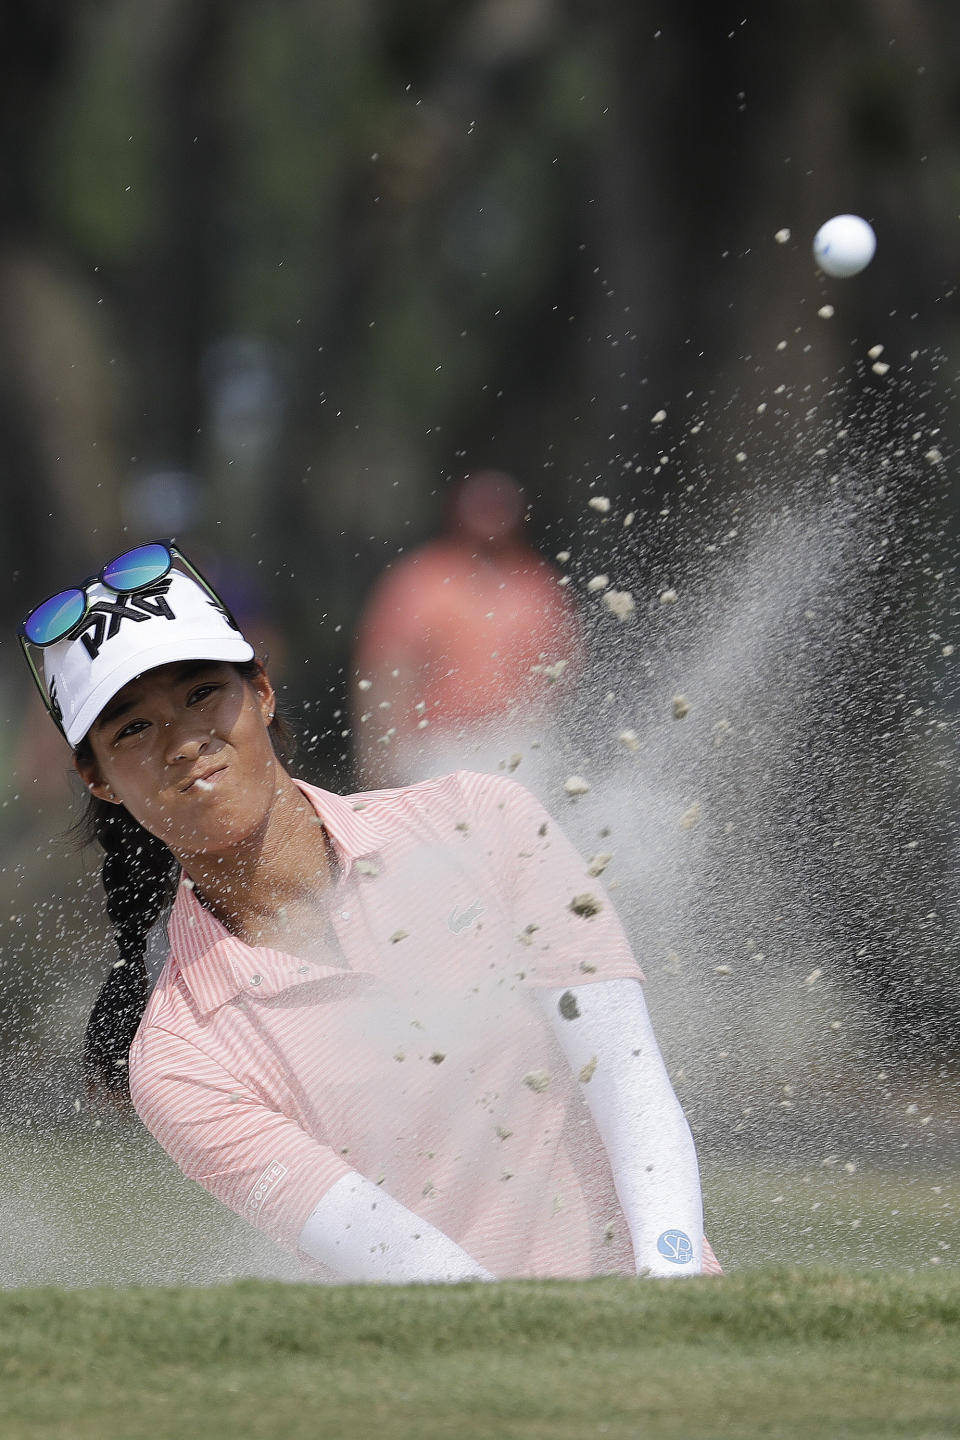 Celine Boutier of France, hits out of a bunker on the eight green during the final round of the U.S. Women's Open golf tournament, Sunday, June 2, 2019, in Charleston, S.C. (AP Photo/Steve Helber)